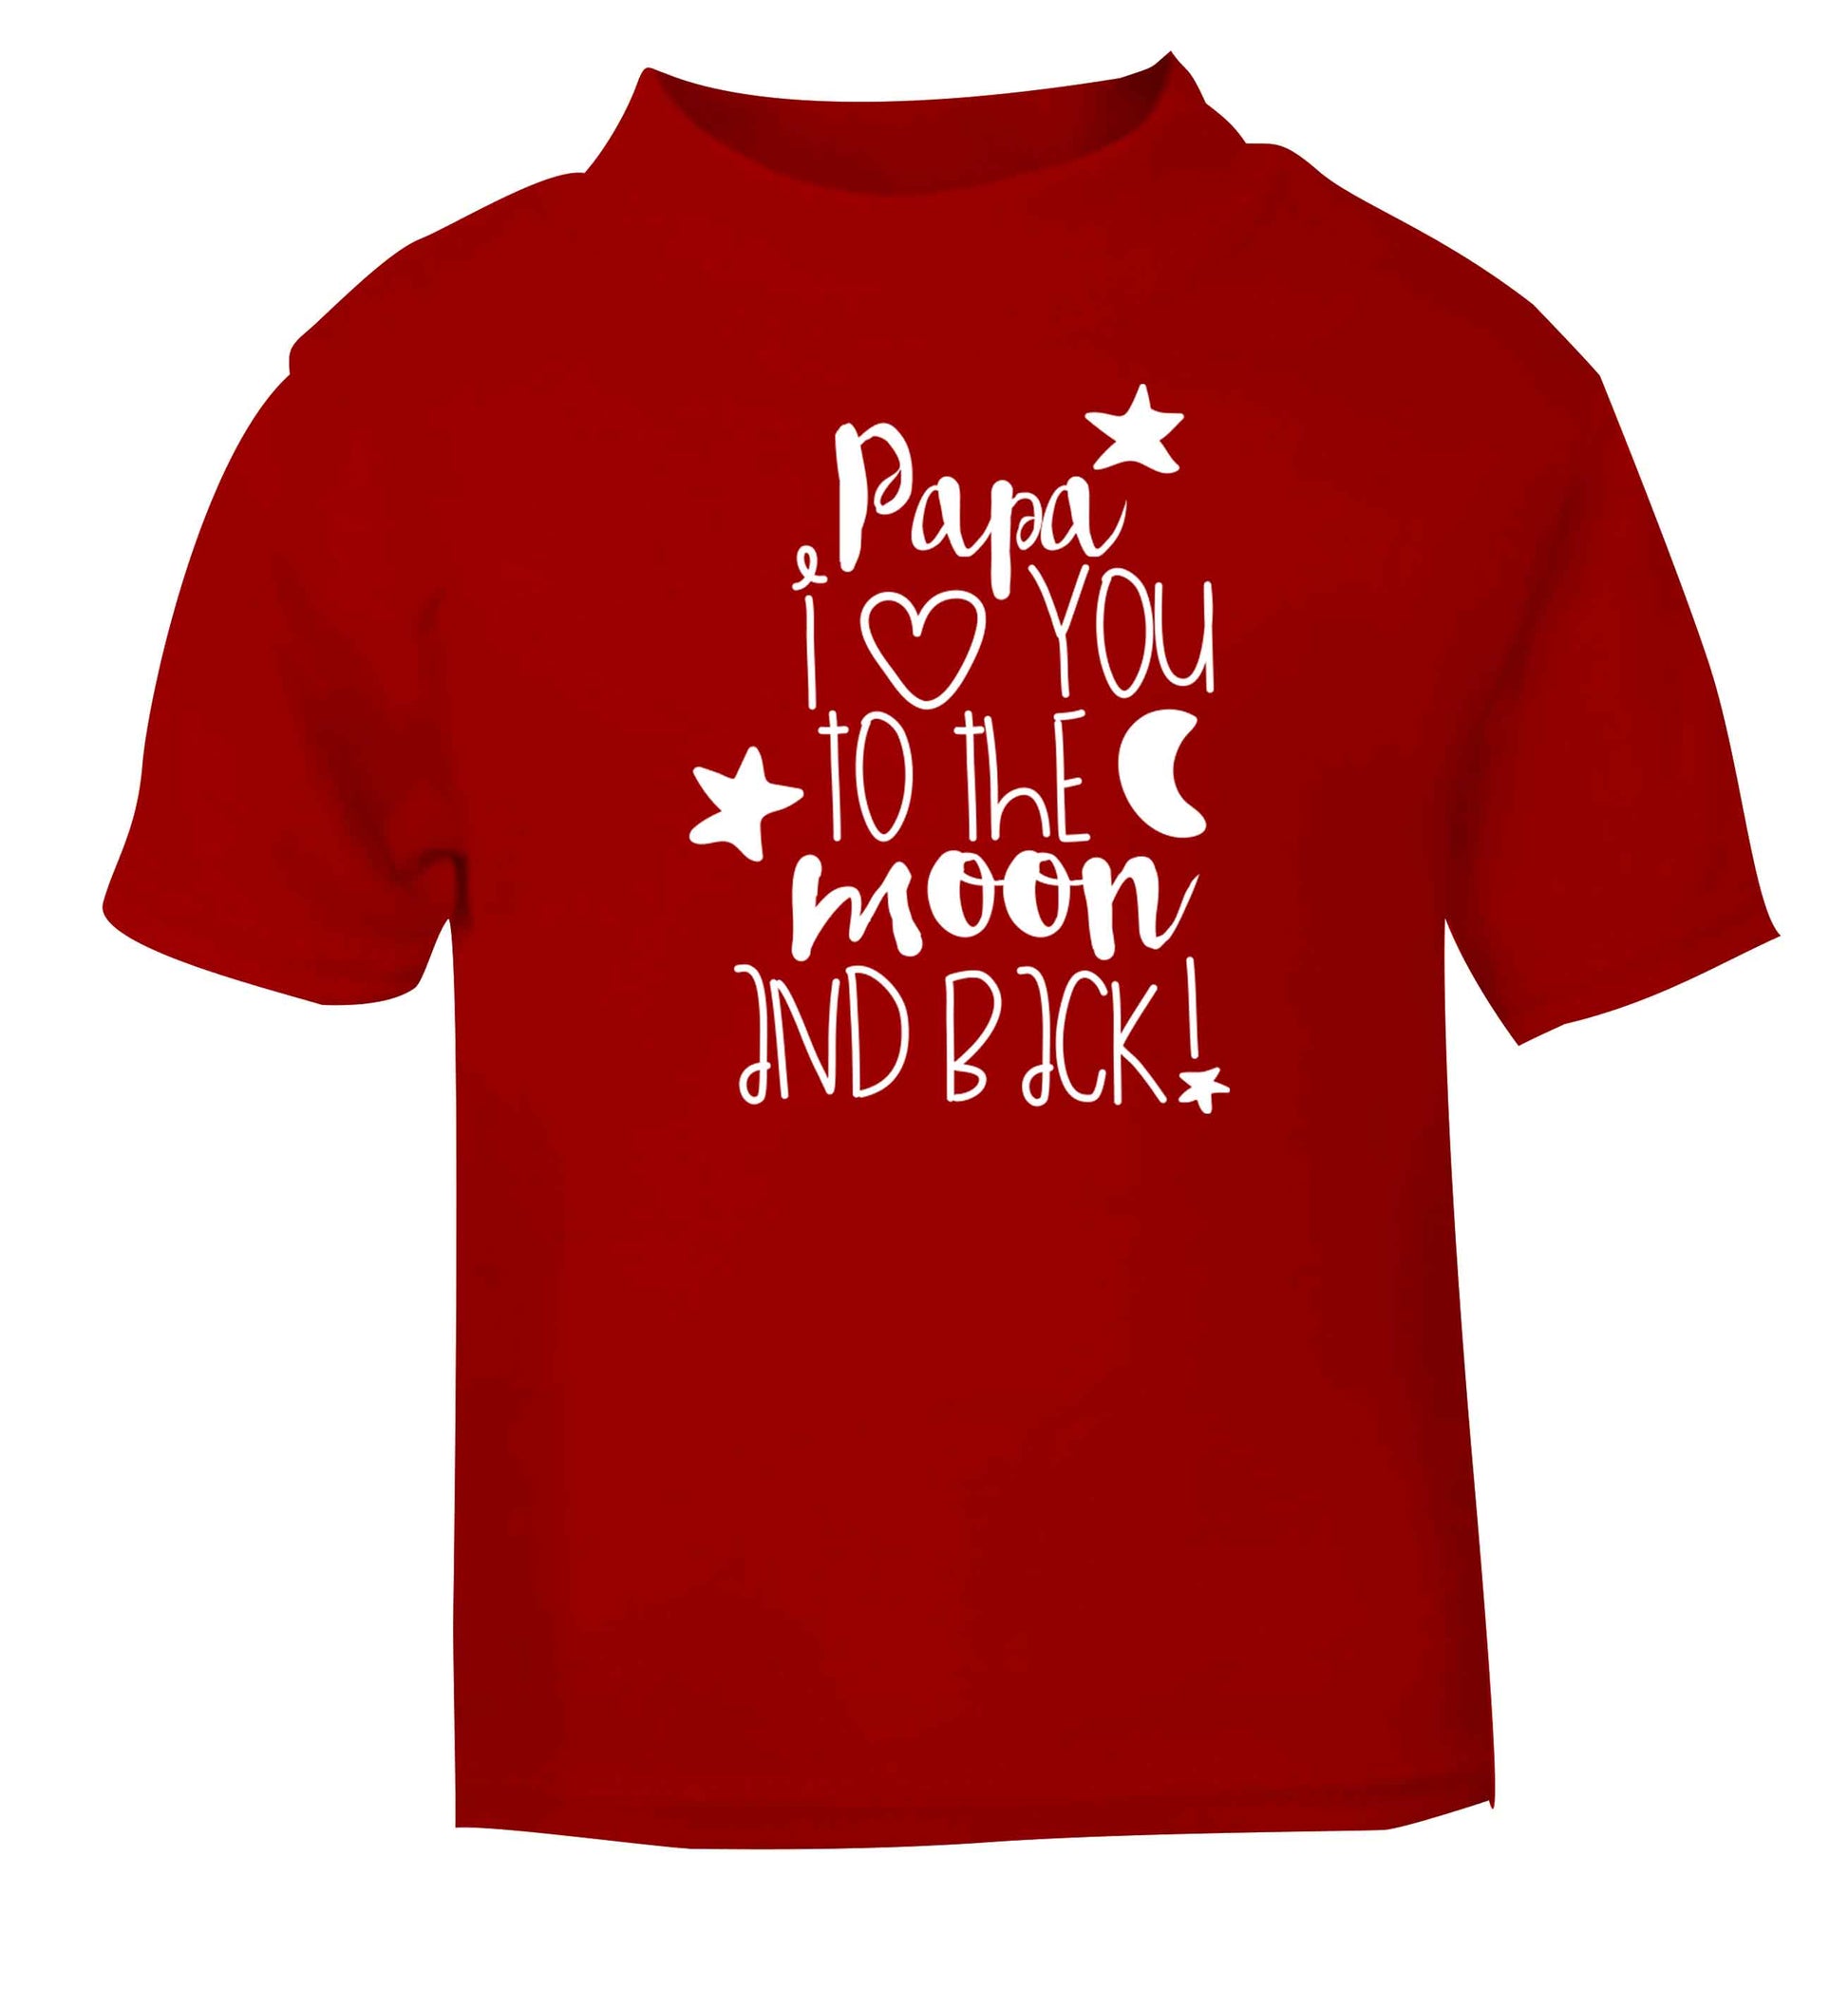 Papa I love you to the moon and back red baby toddler Tshirt 2 Years